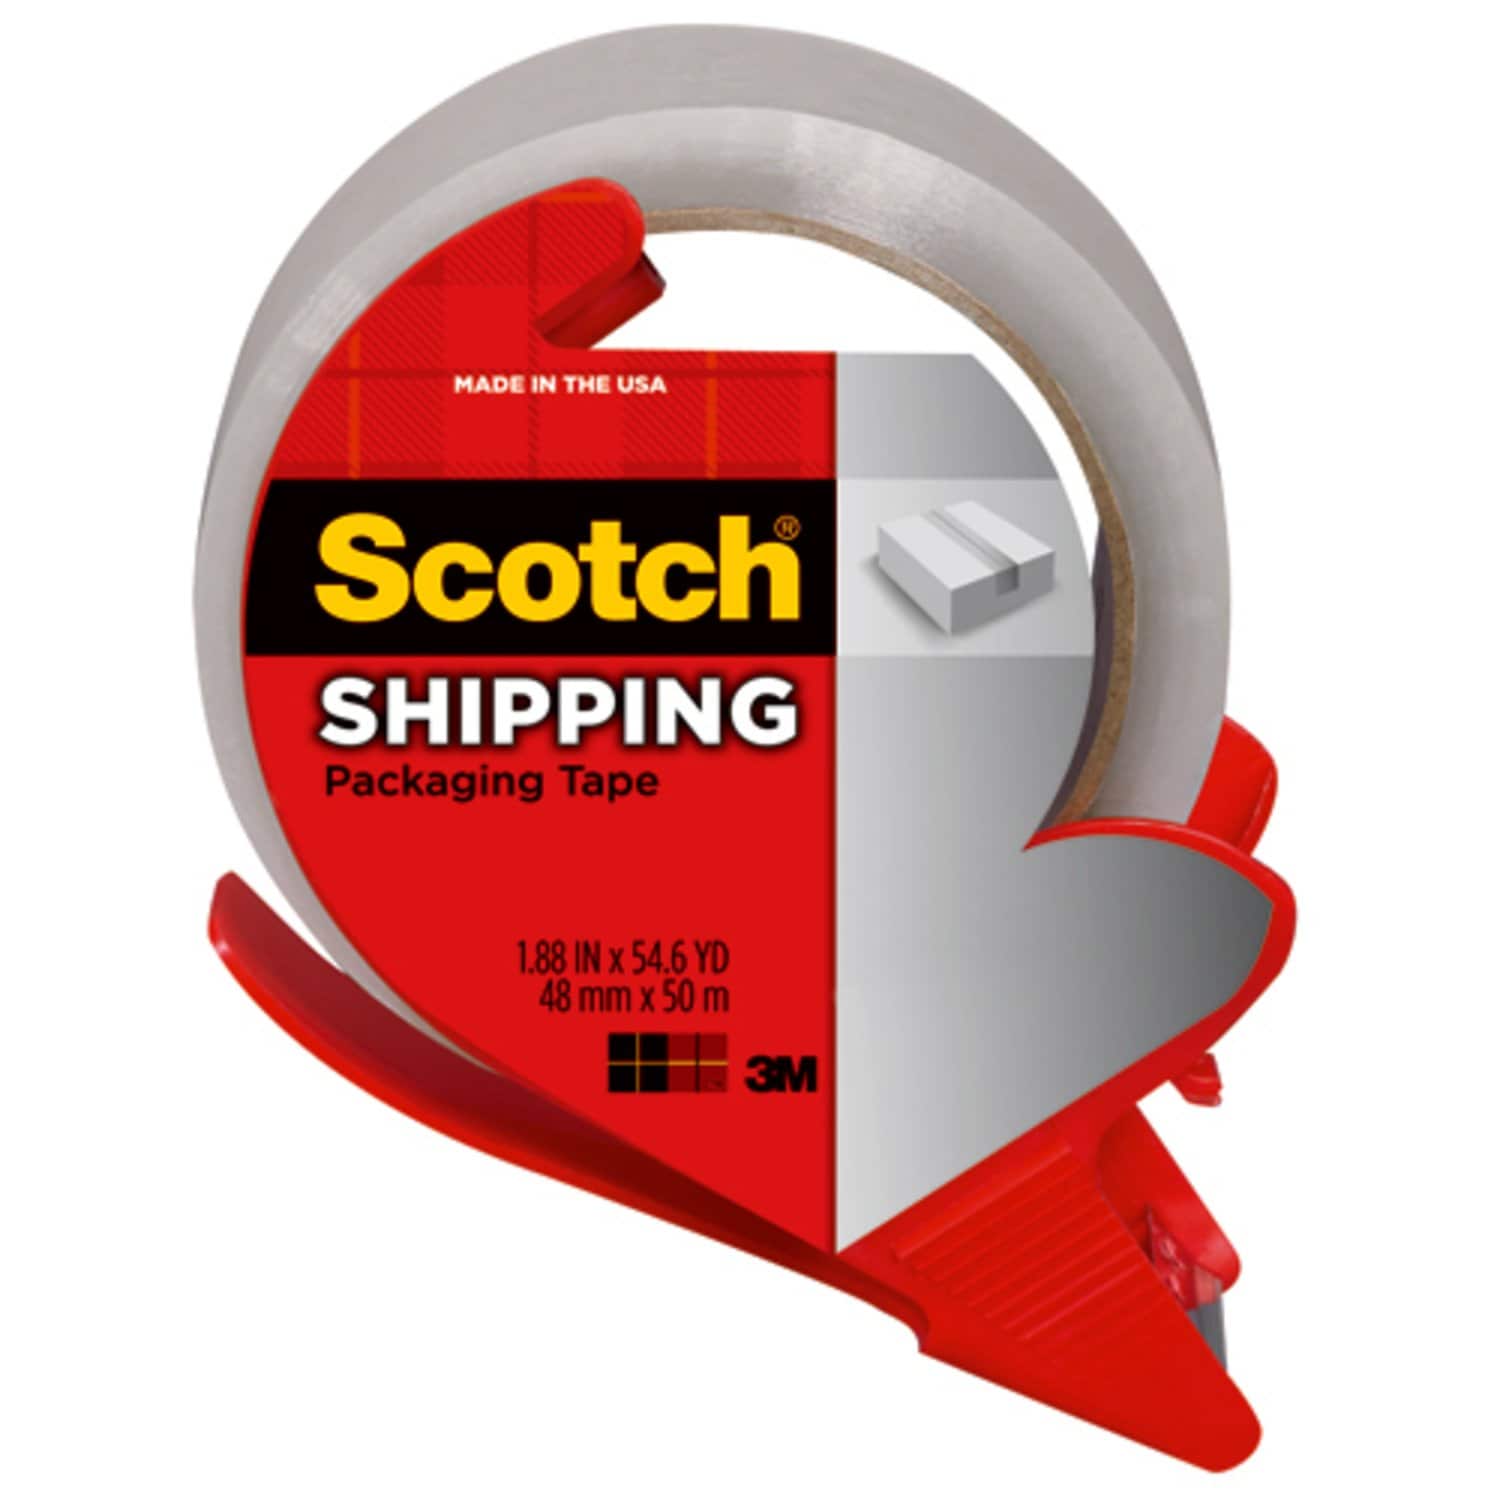 7100260681 - Scotch Shipping Packaging Tape 3250-RD-36GC, 1.88 in x 54.6 yd (48 mm x 50 m)